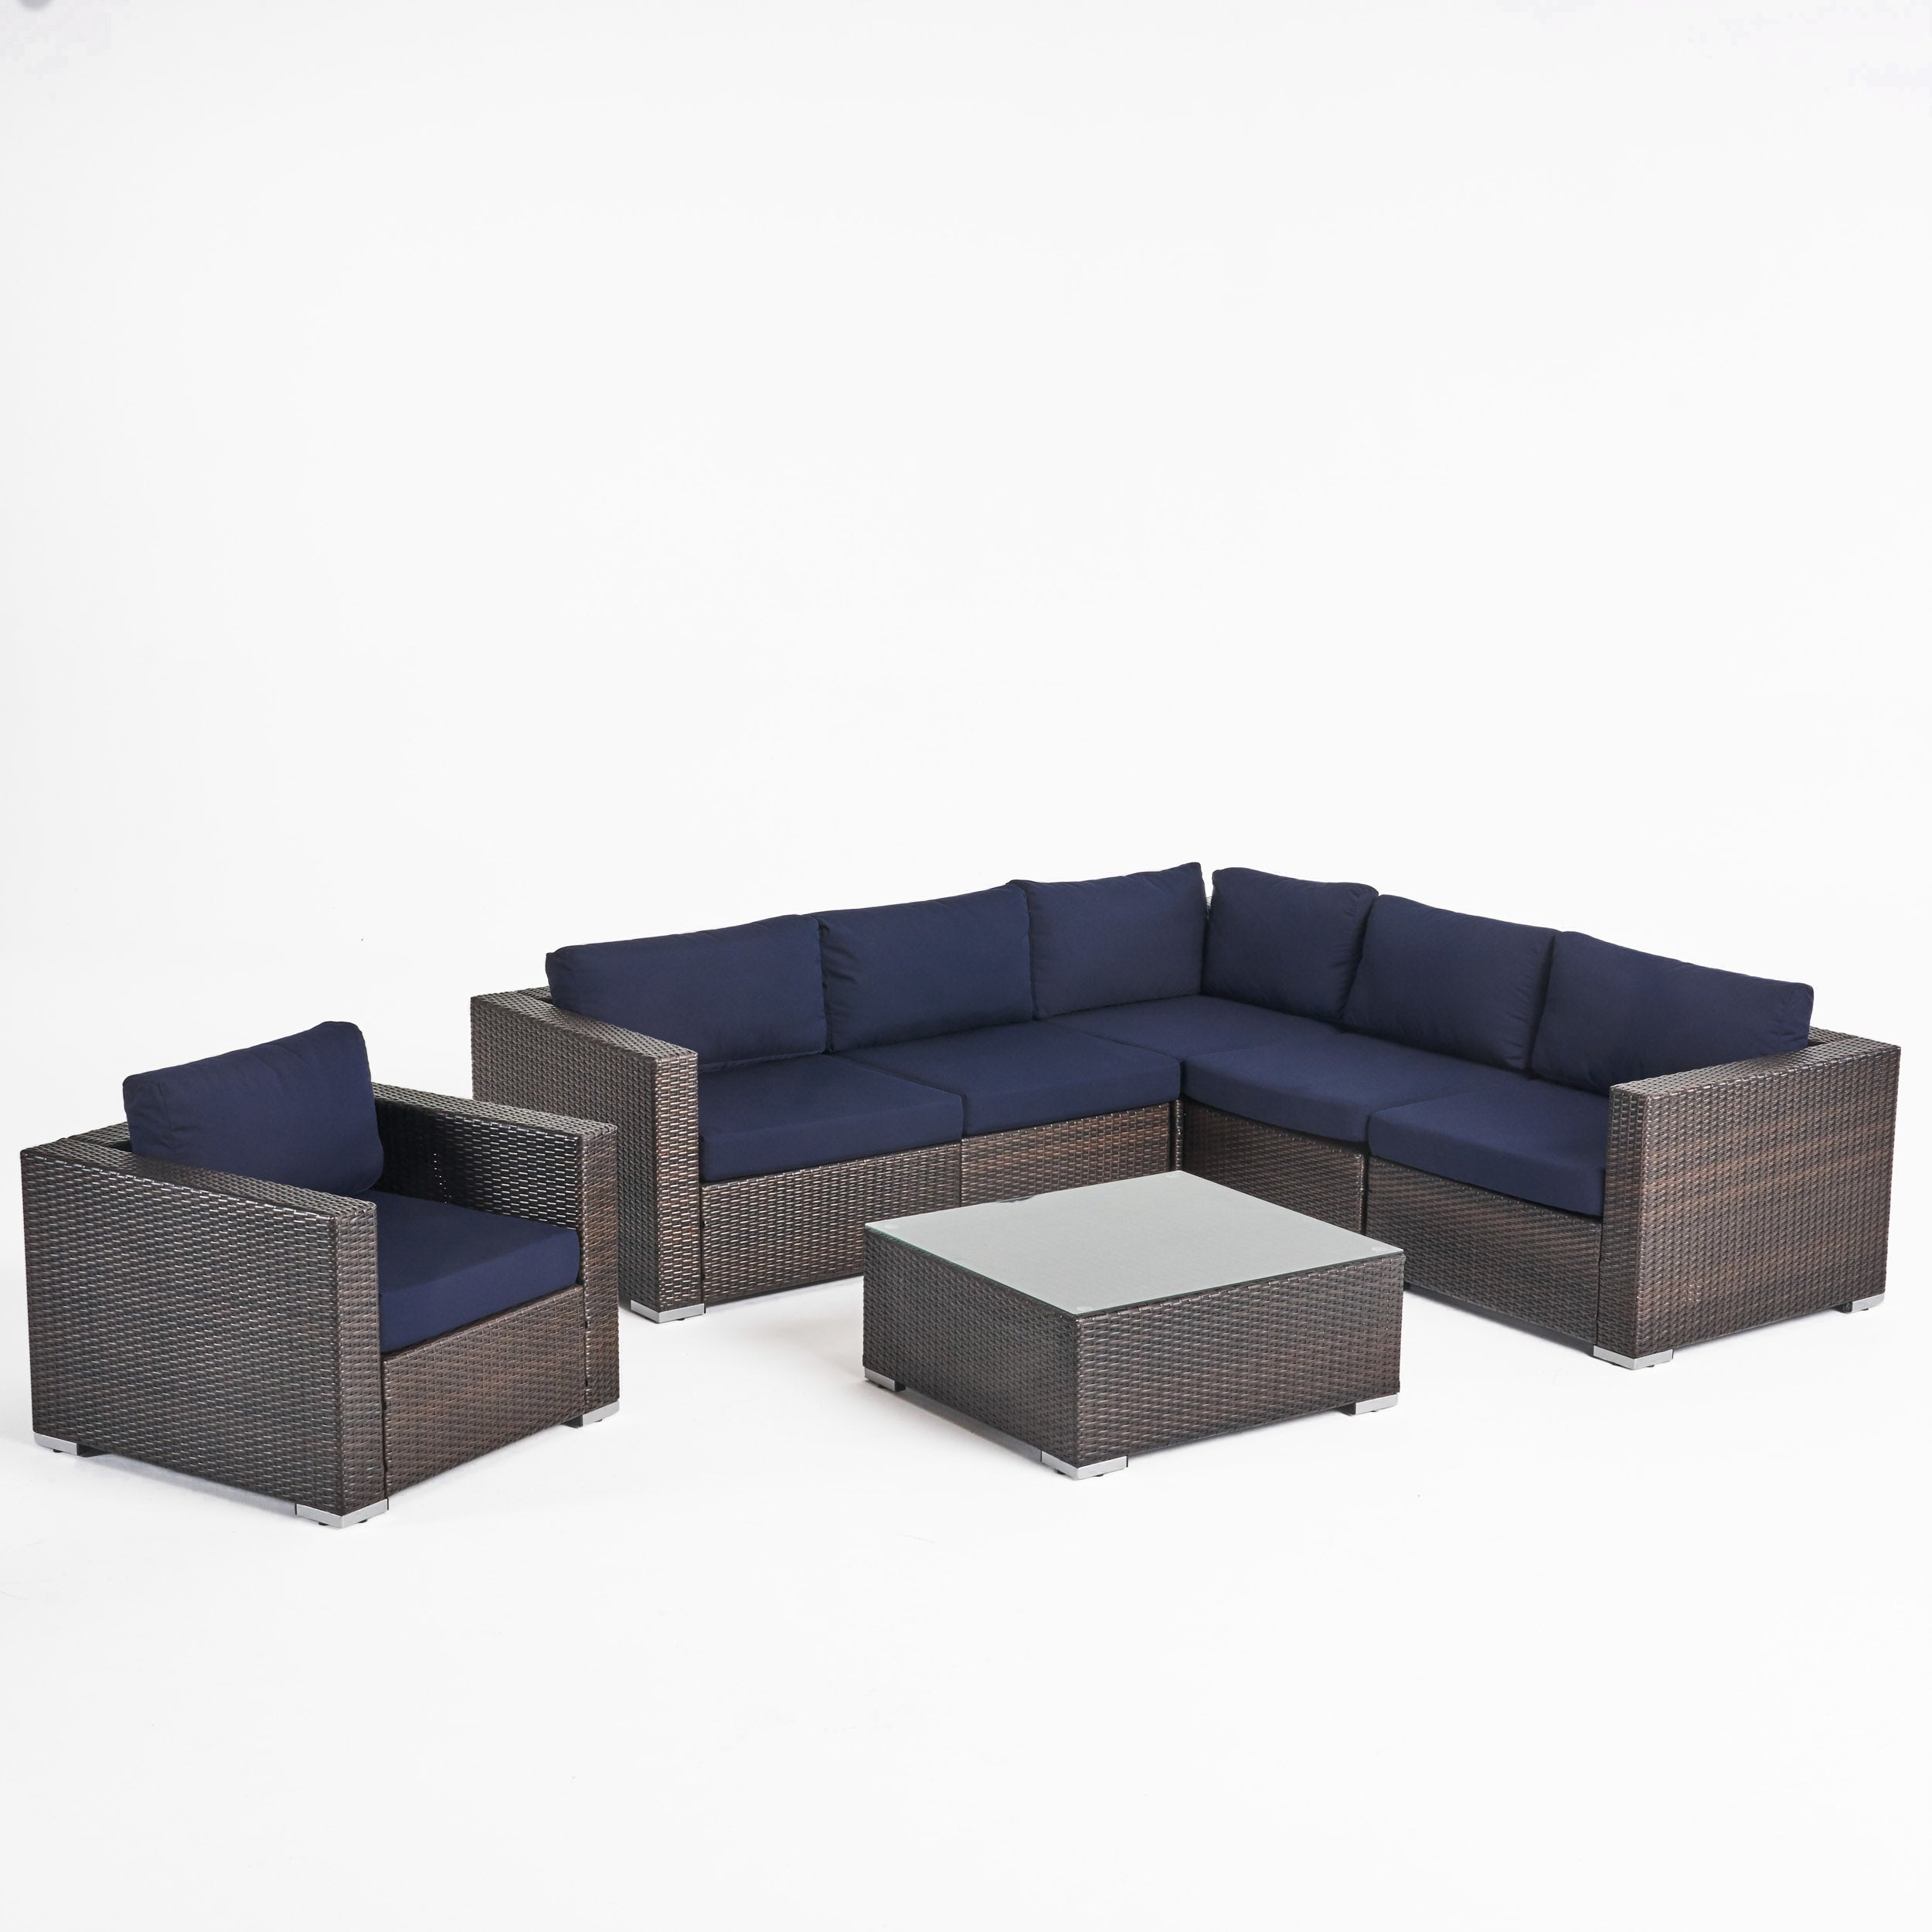 Kyra Outdoor 6 Seater Wicker Sectional Sofa Set with Sunbrella Cushions Gray Canvas Granite